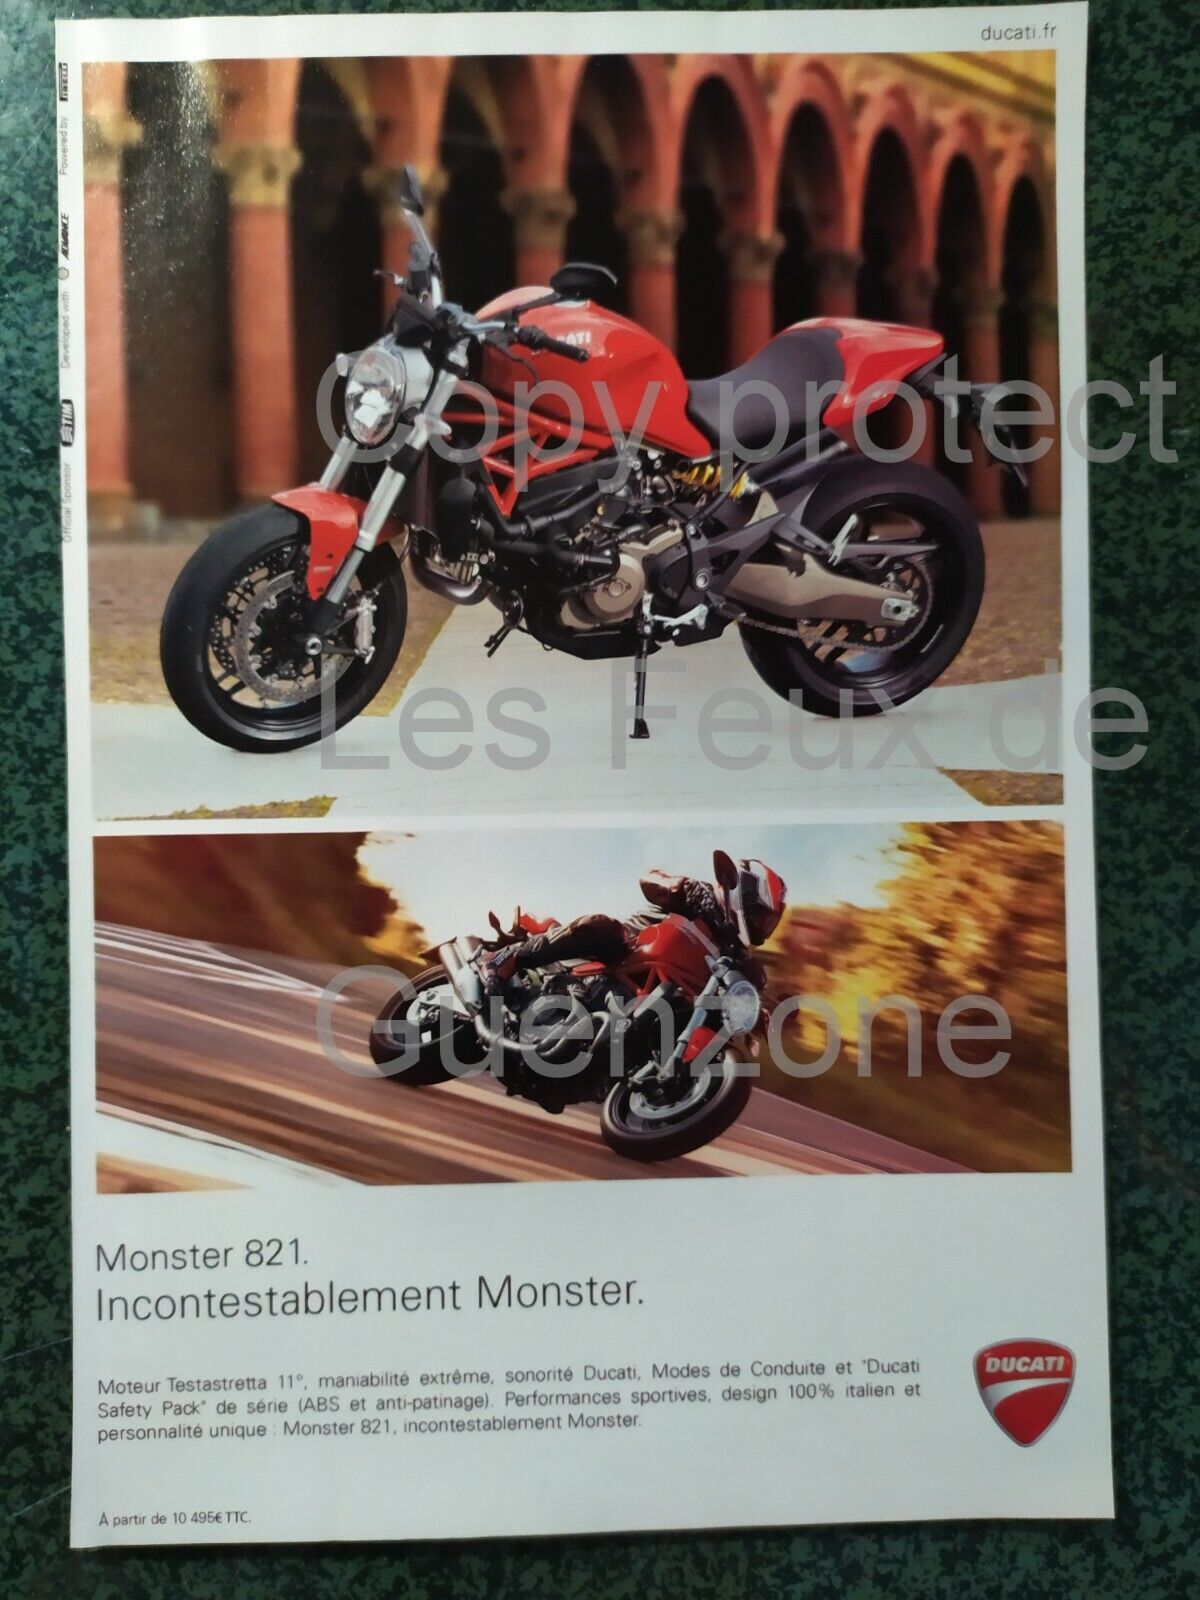 2015 DUCATI MONSTER 821 MOTORCYCLE DOCUMENT CUTOUT ADVERTISEMENT 